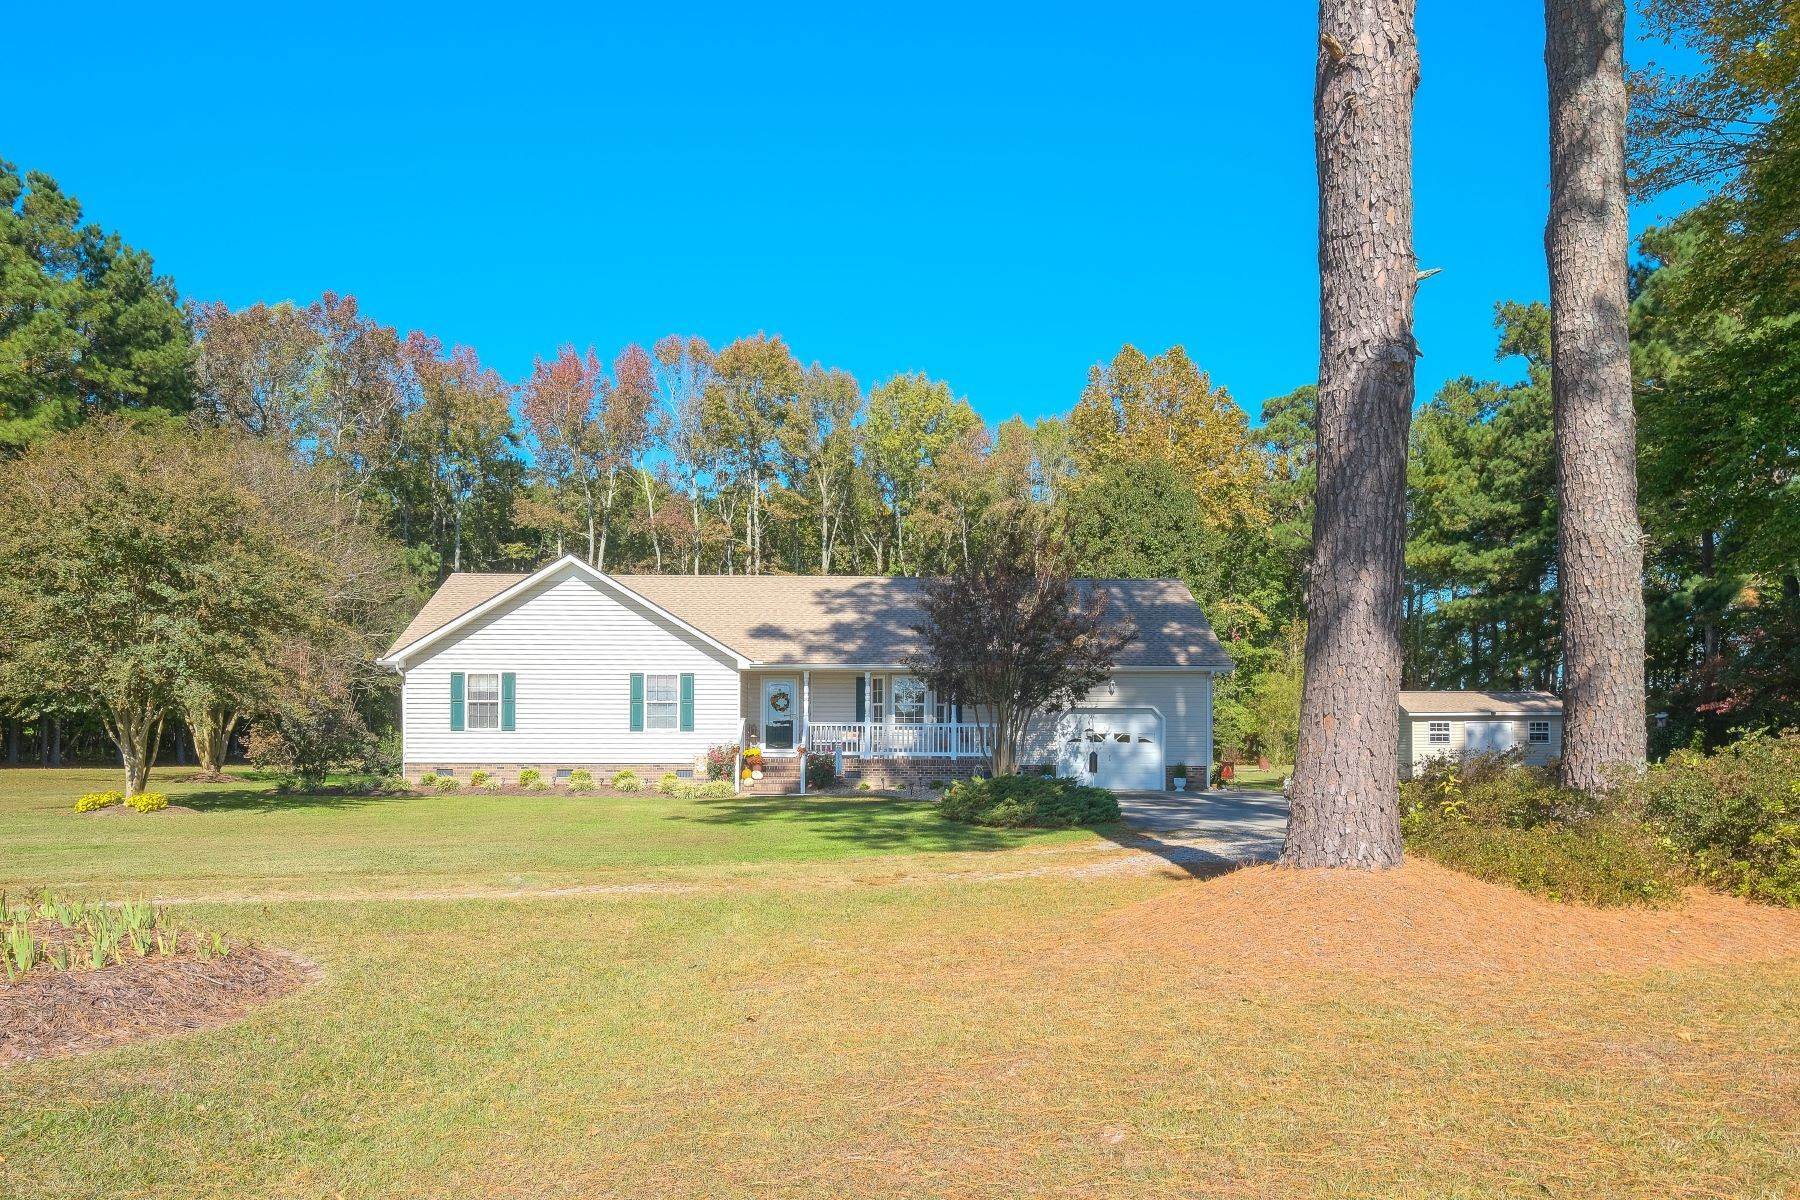 Single Family Homes for Sale at EASY COUNTRY LIVING! 1651 Ocean Highway S Edenton, North Carolina 27932 United States